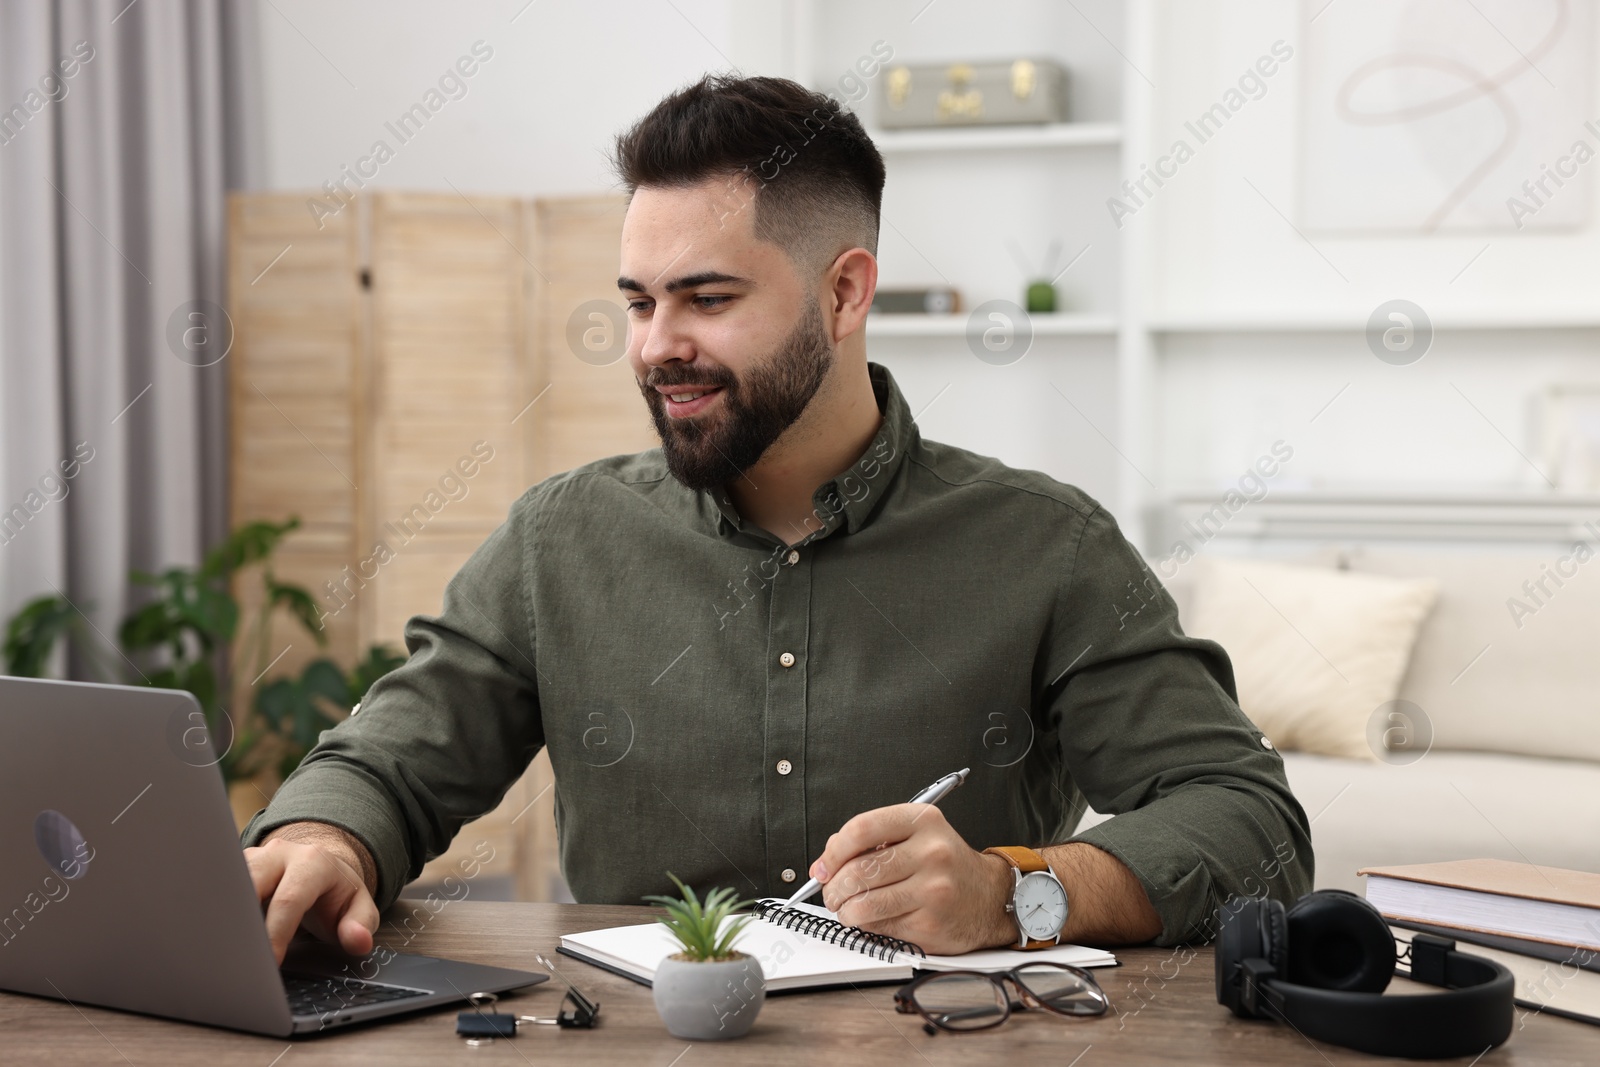 Photo of E-learning. Young man taking notes during online lesson at wooden table indoors